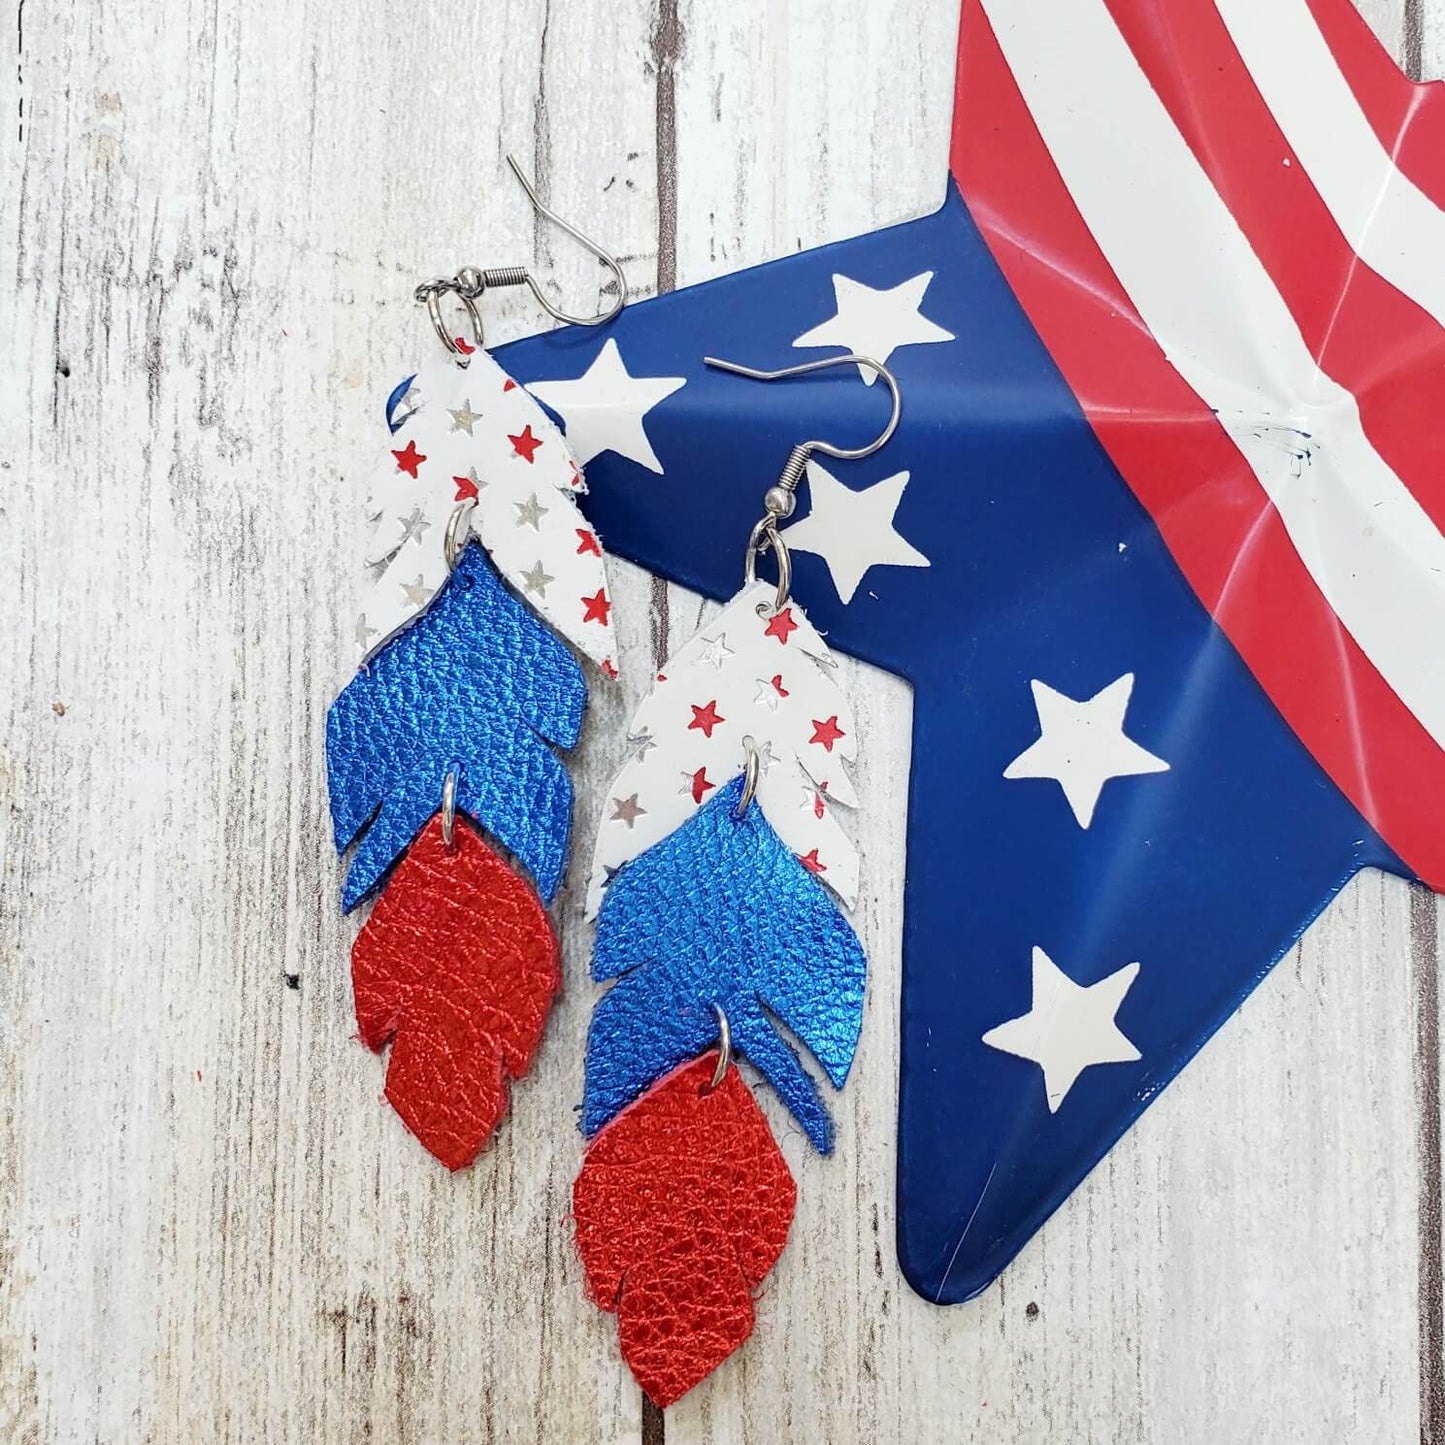 Patriotic Quinns - White, Blue and Red